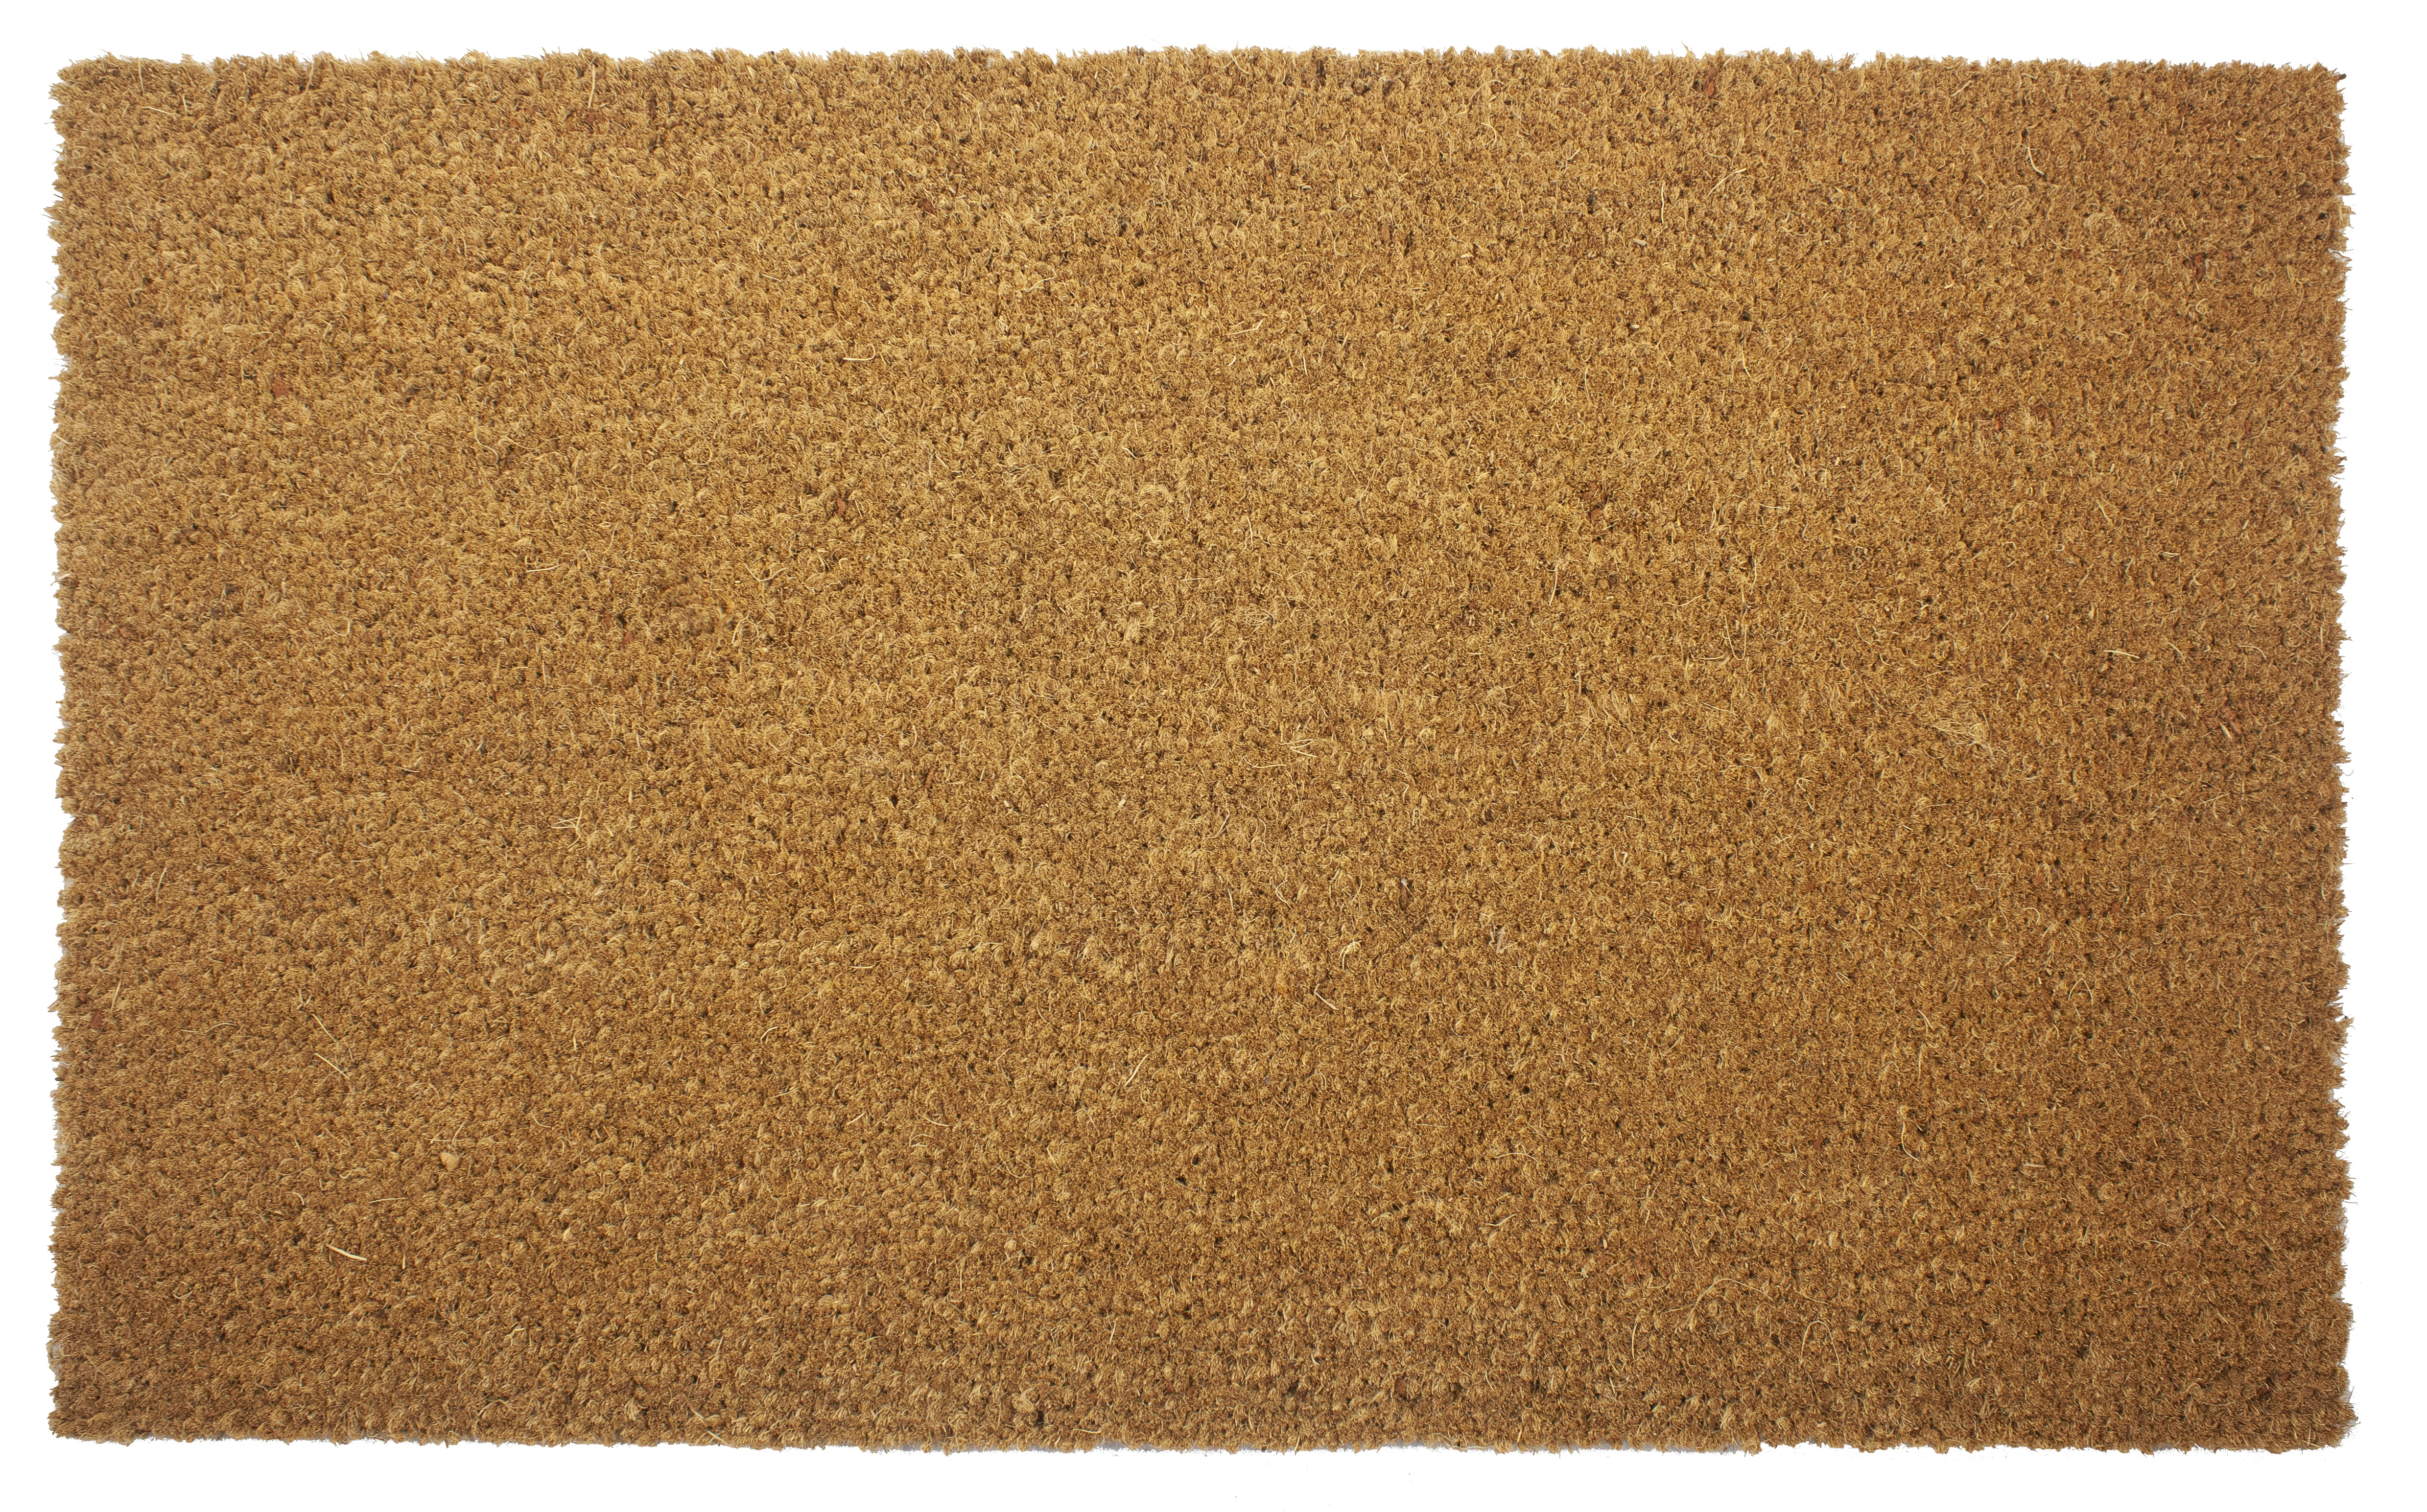 100% Natural Coir Fibre Doormat with PVC Backing Black Grey White Amber Triangle 